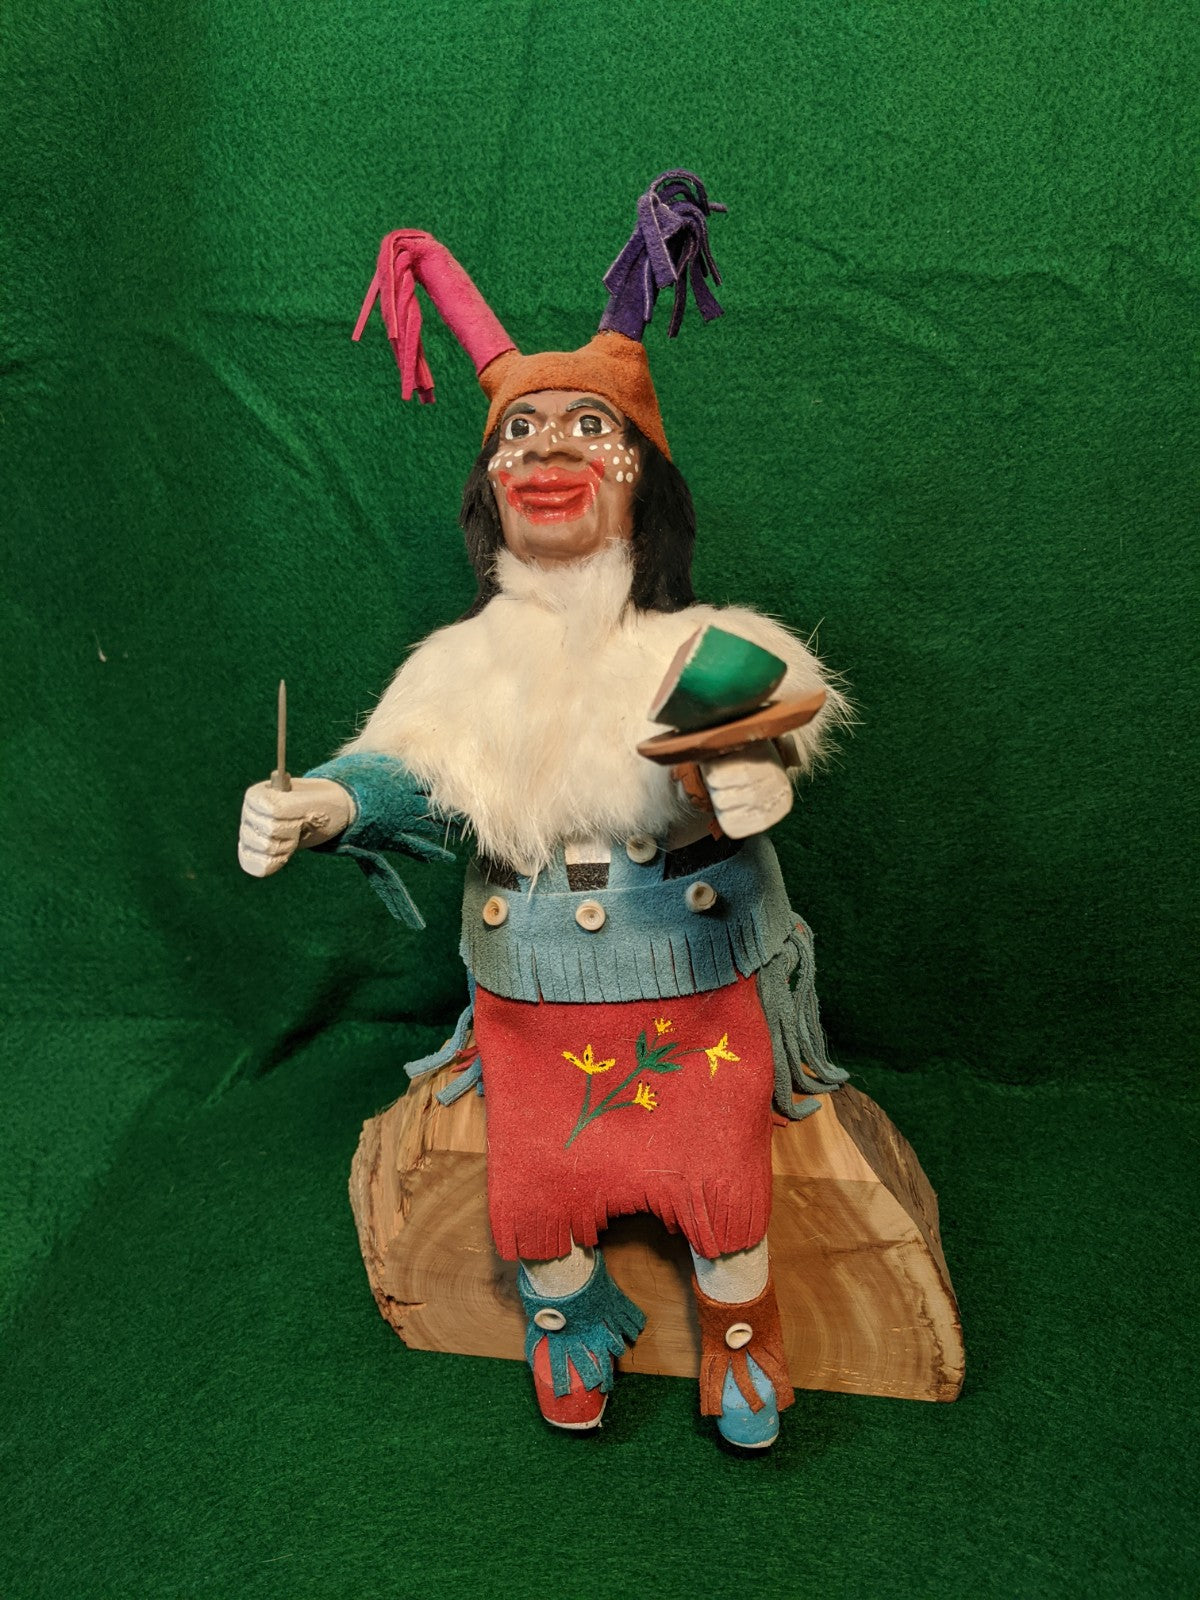 Native American Kachina figurine, The Clown, artist signed and numbered